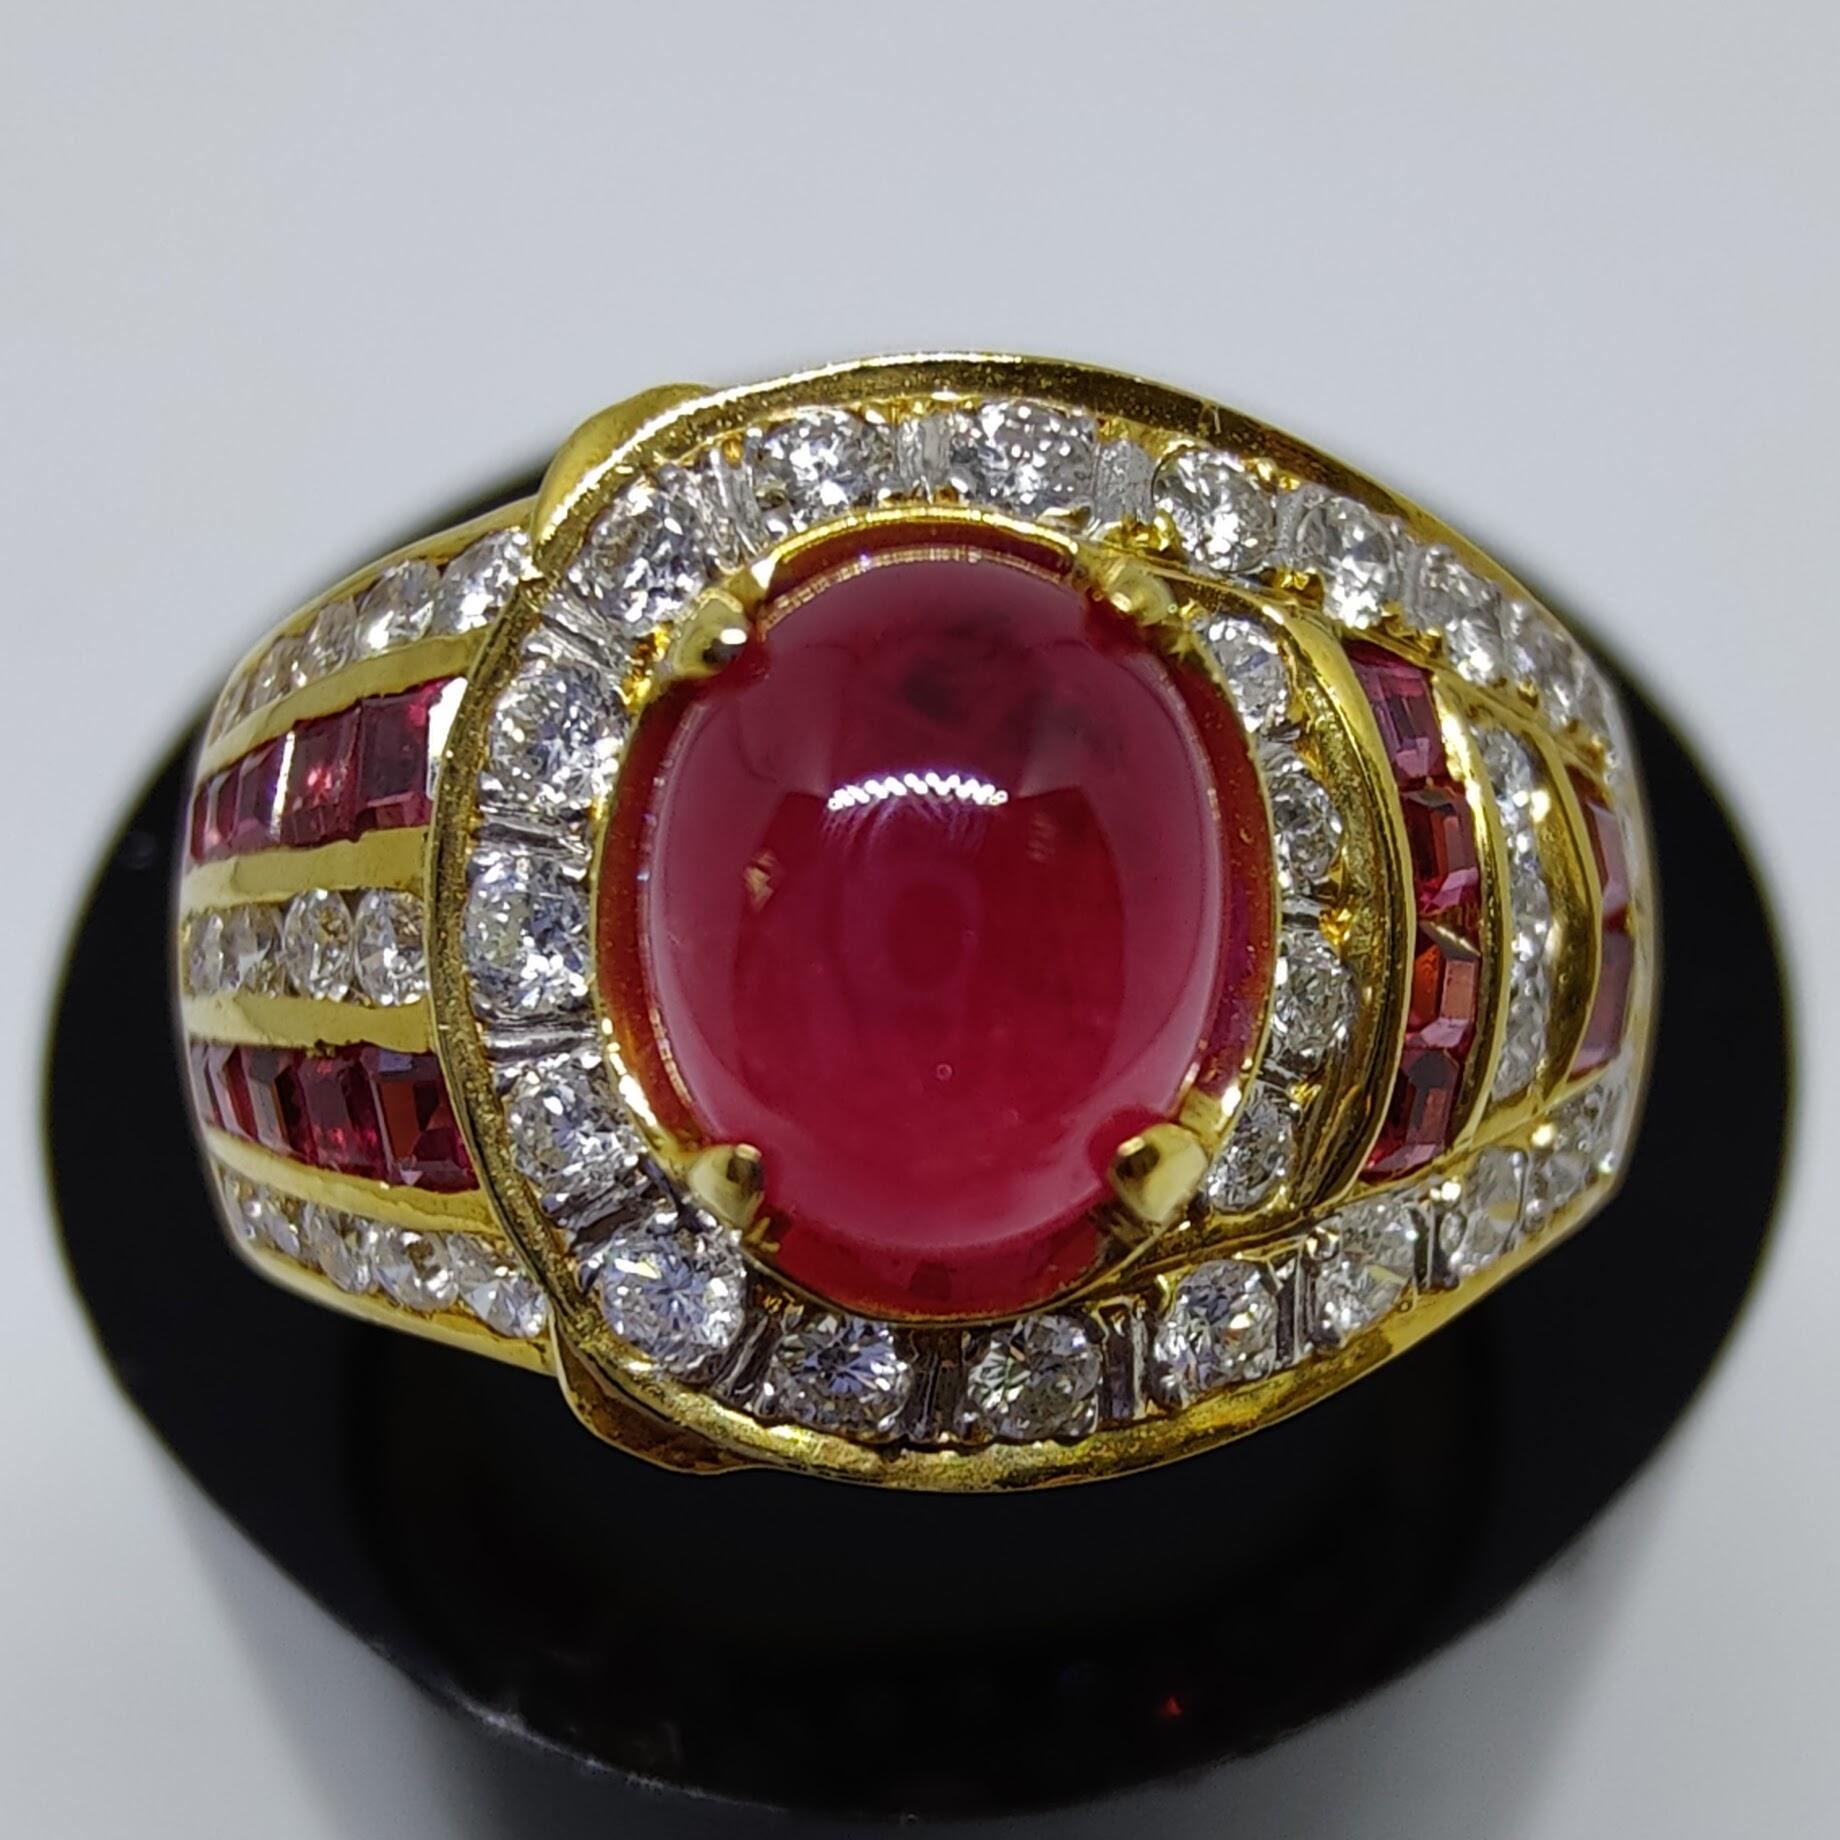 This magnificent vintage gold ring features a cabochon Ruby at the center, surrounded by paves of Blue Sapphire and Diamonds.

The vividly red oval cabochon cut Ruby weighs 2.52 carats, is accentuated by 0.4ct paves of 16 princess cut Ruby and